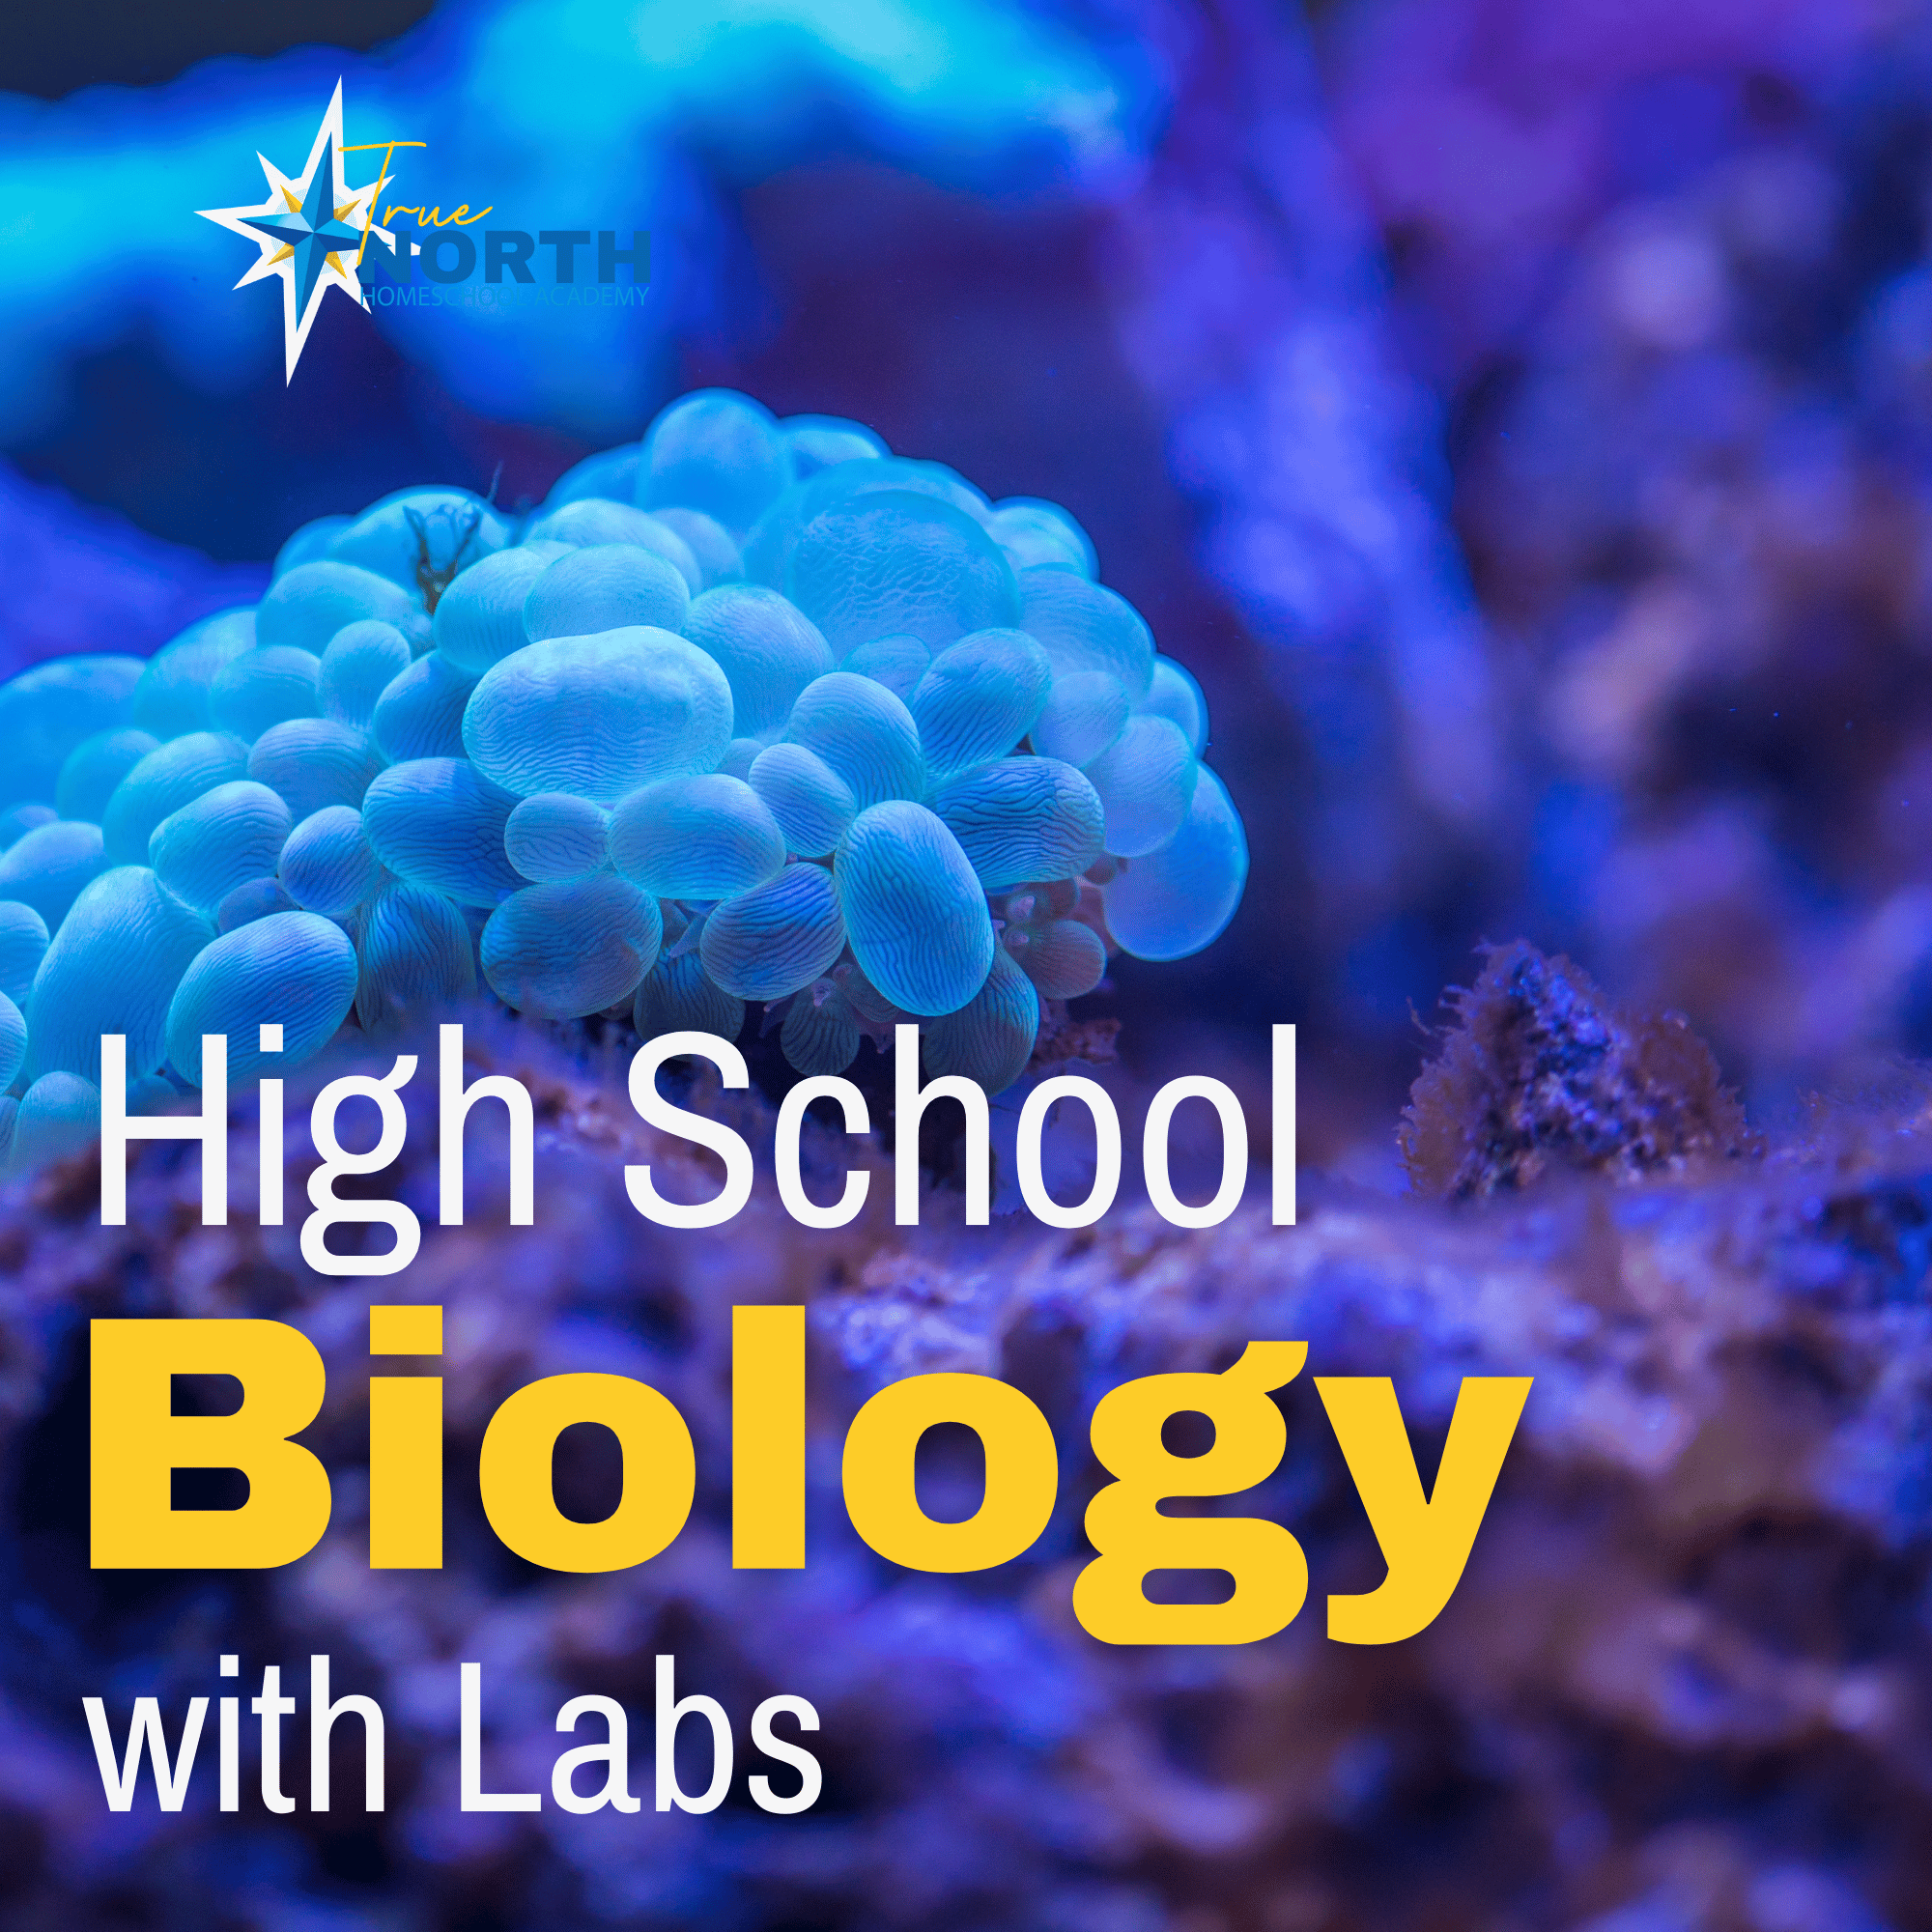 High School biology with labs with dr. Kristin Moon